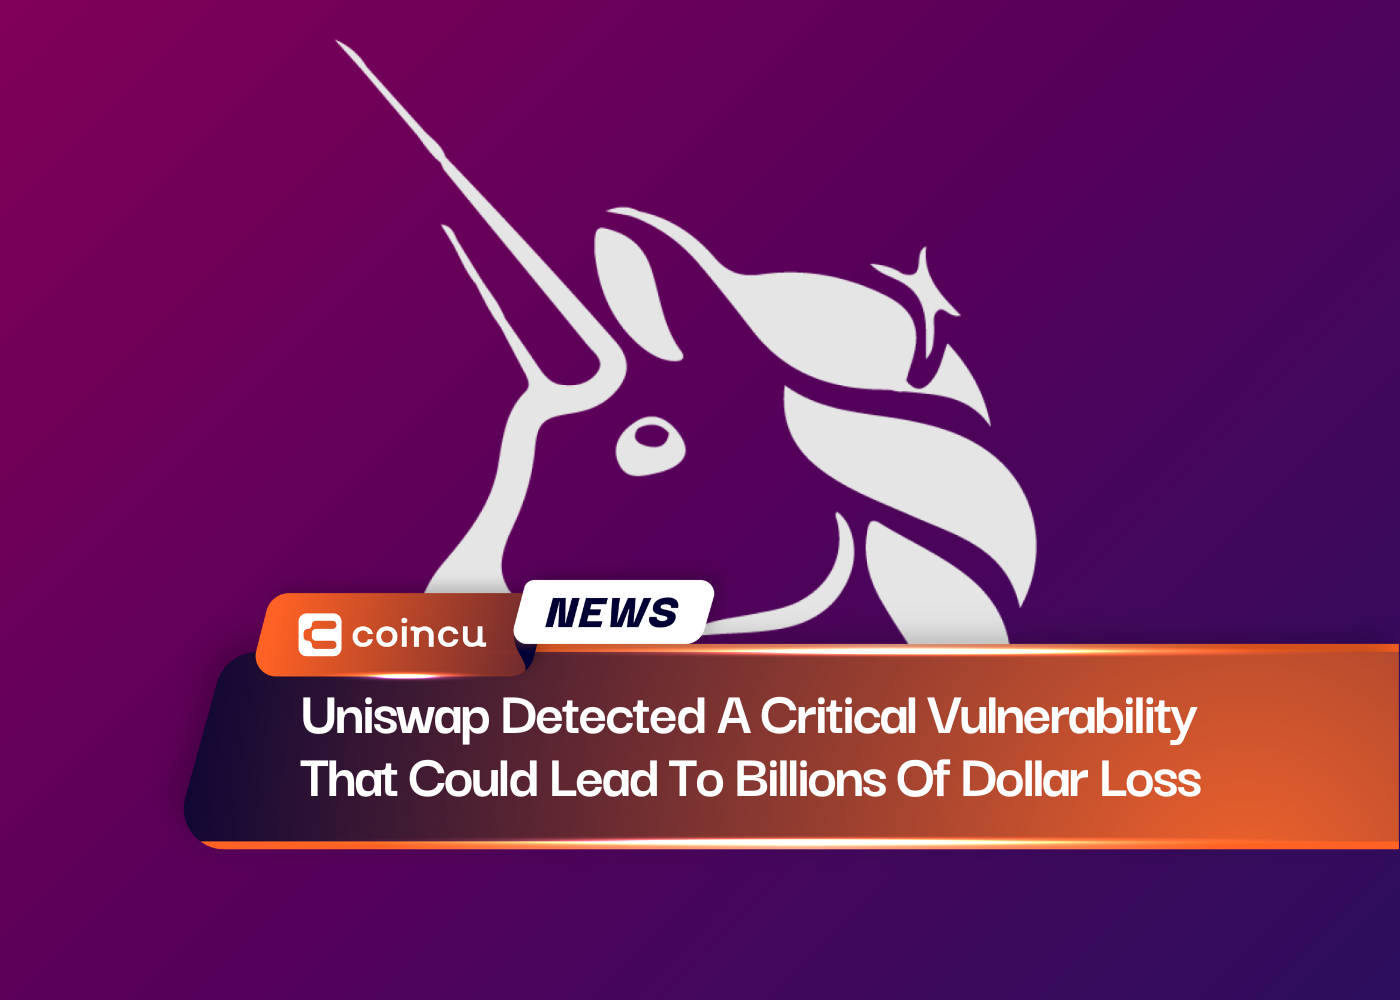 Uniswap Detected A Critical Vulnerability That Could Lead To Billions Of Dollar Loss